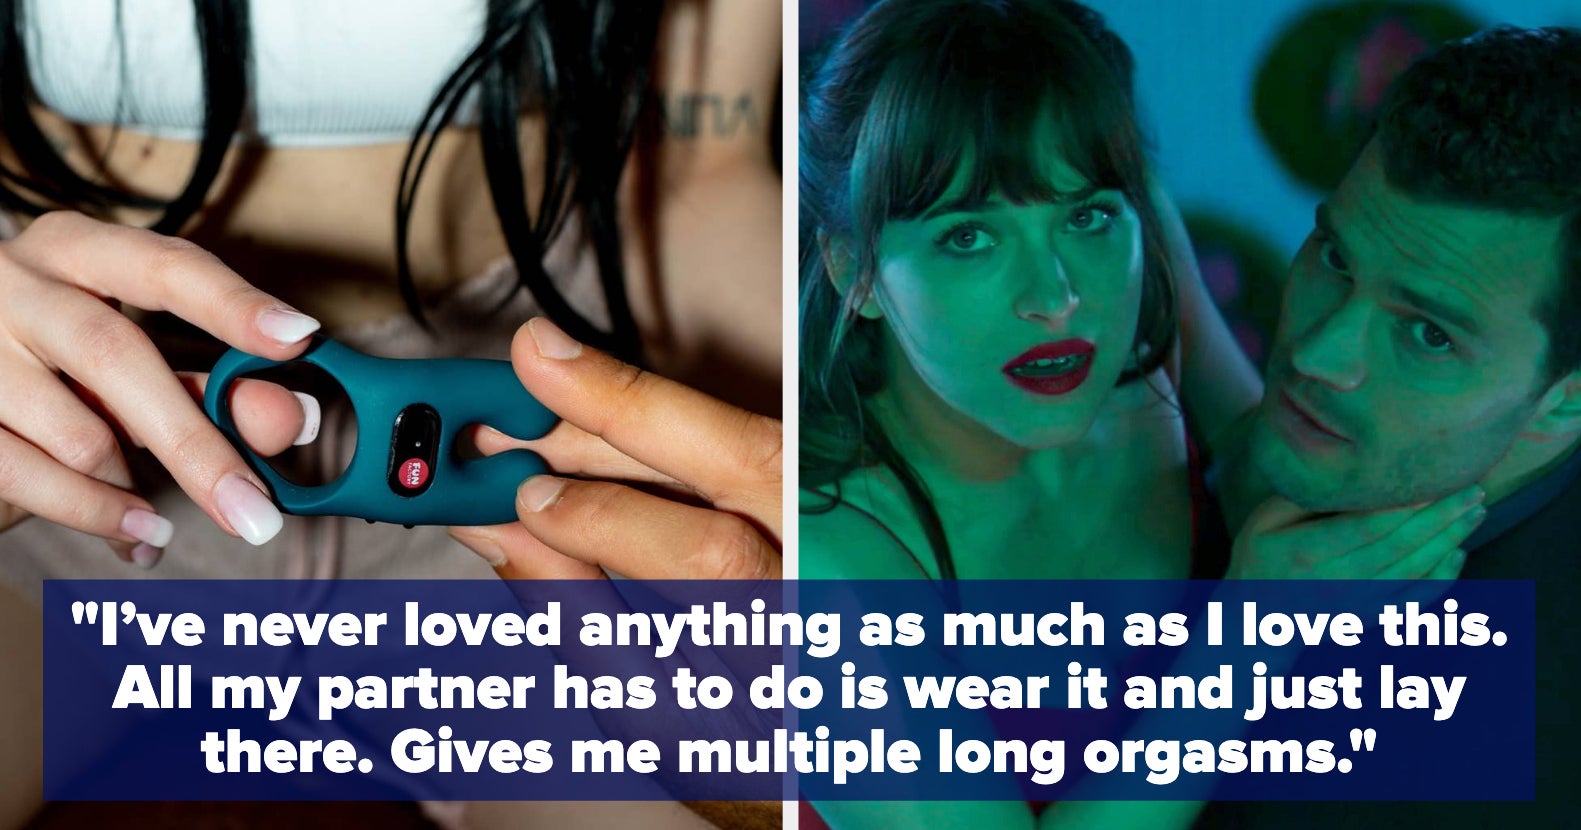 34 Sex Toys And Accessories To Blow Your Partners Mind